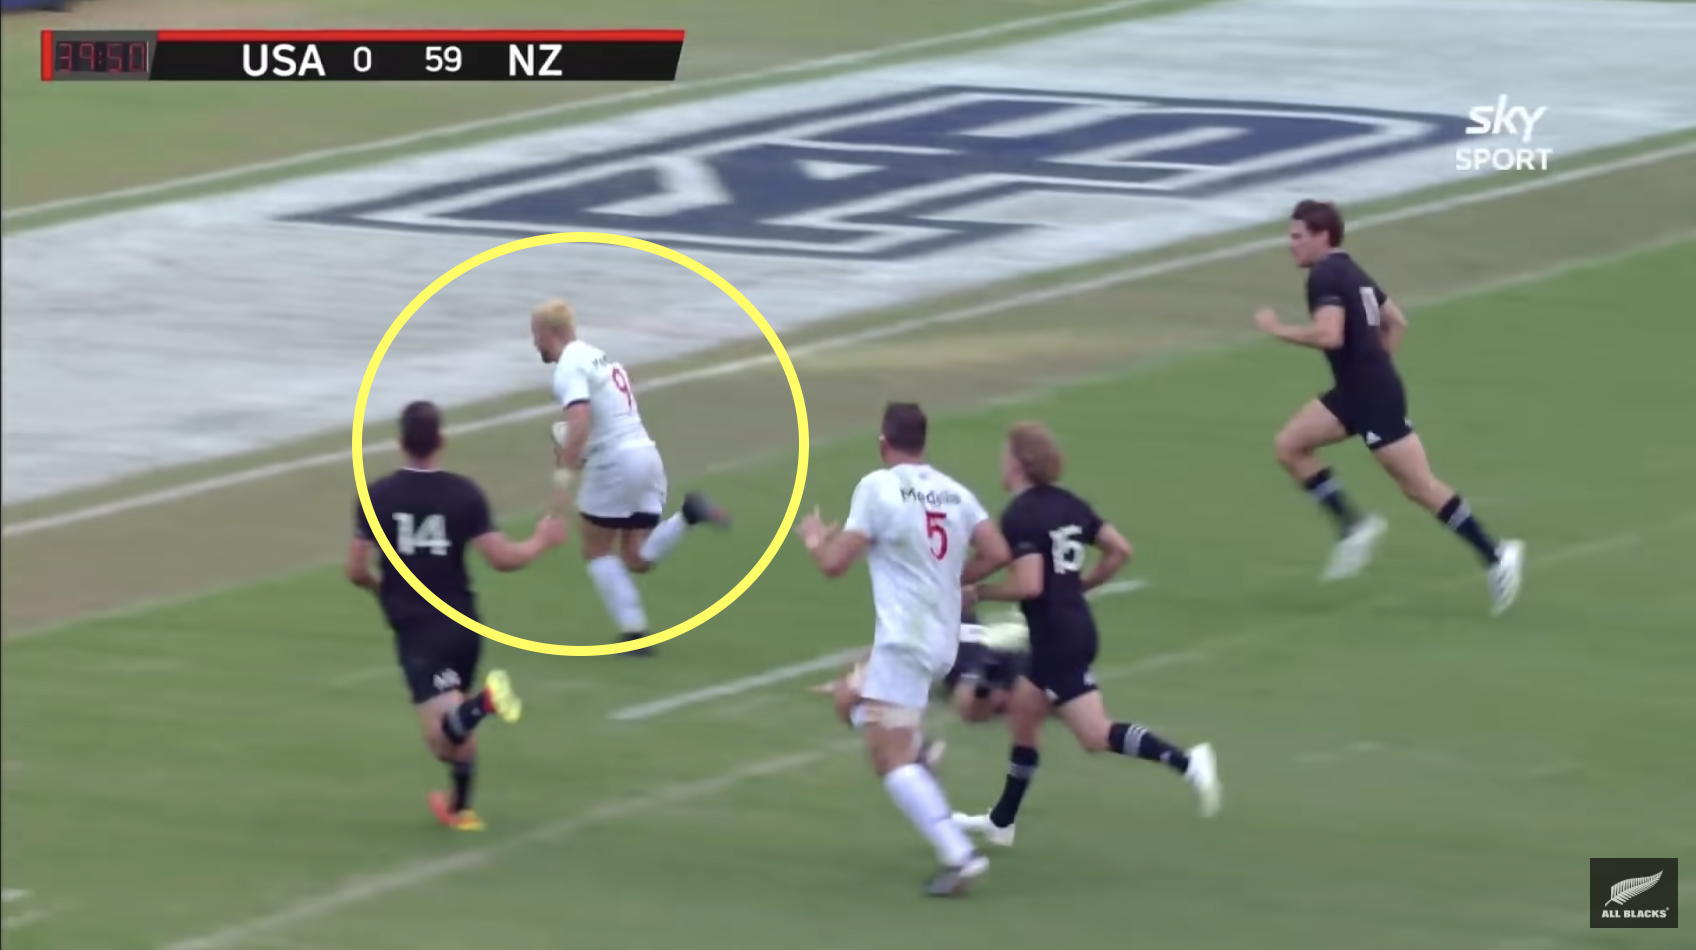 The history-making try that stole the show in All Blacks' win over USA